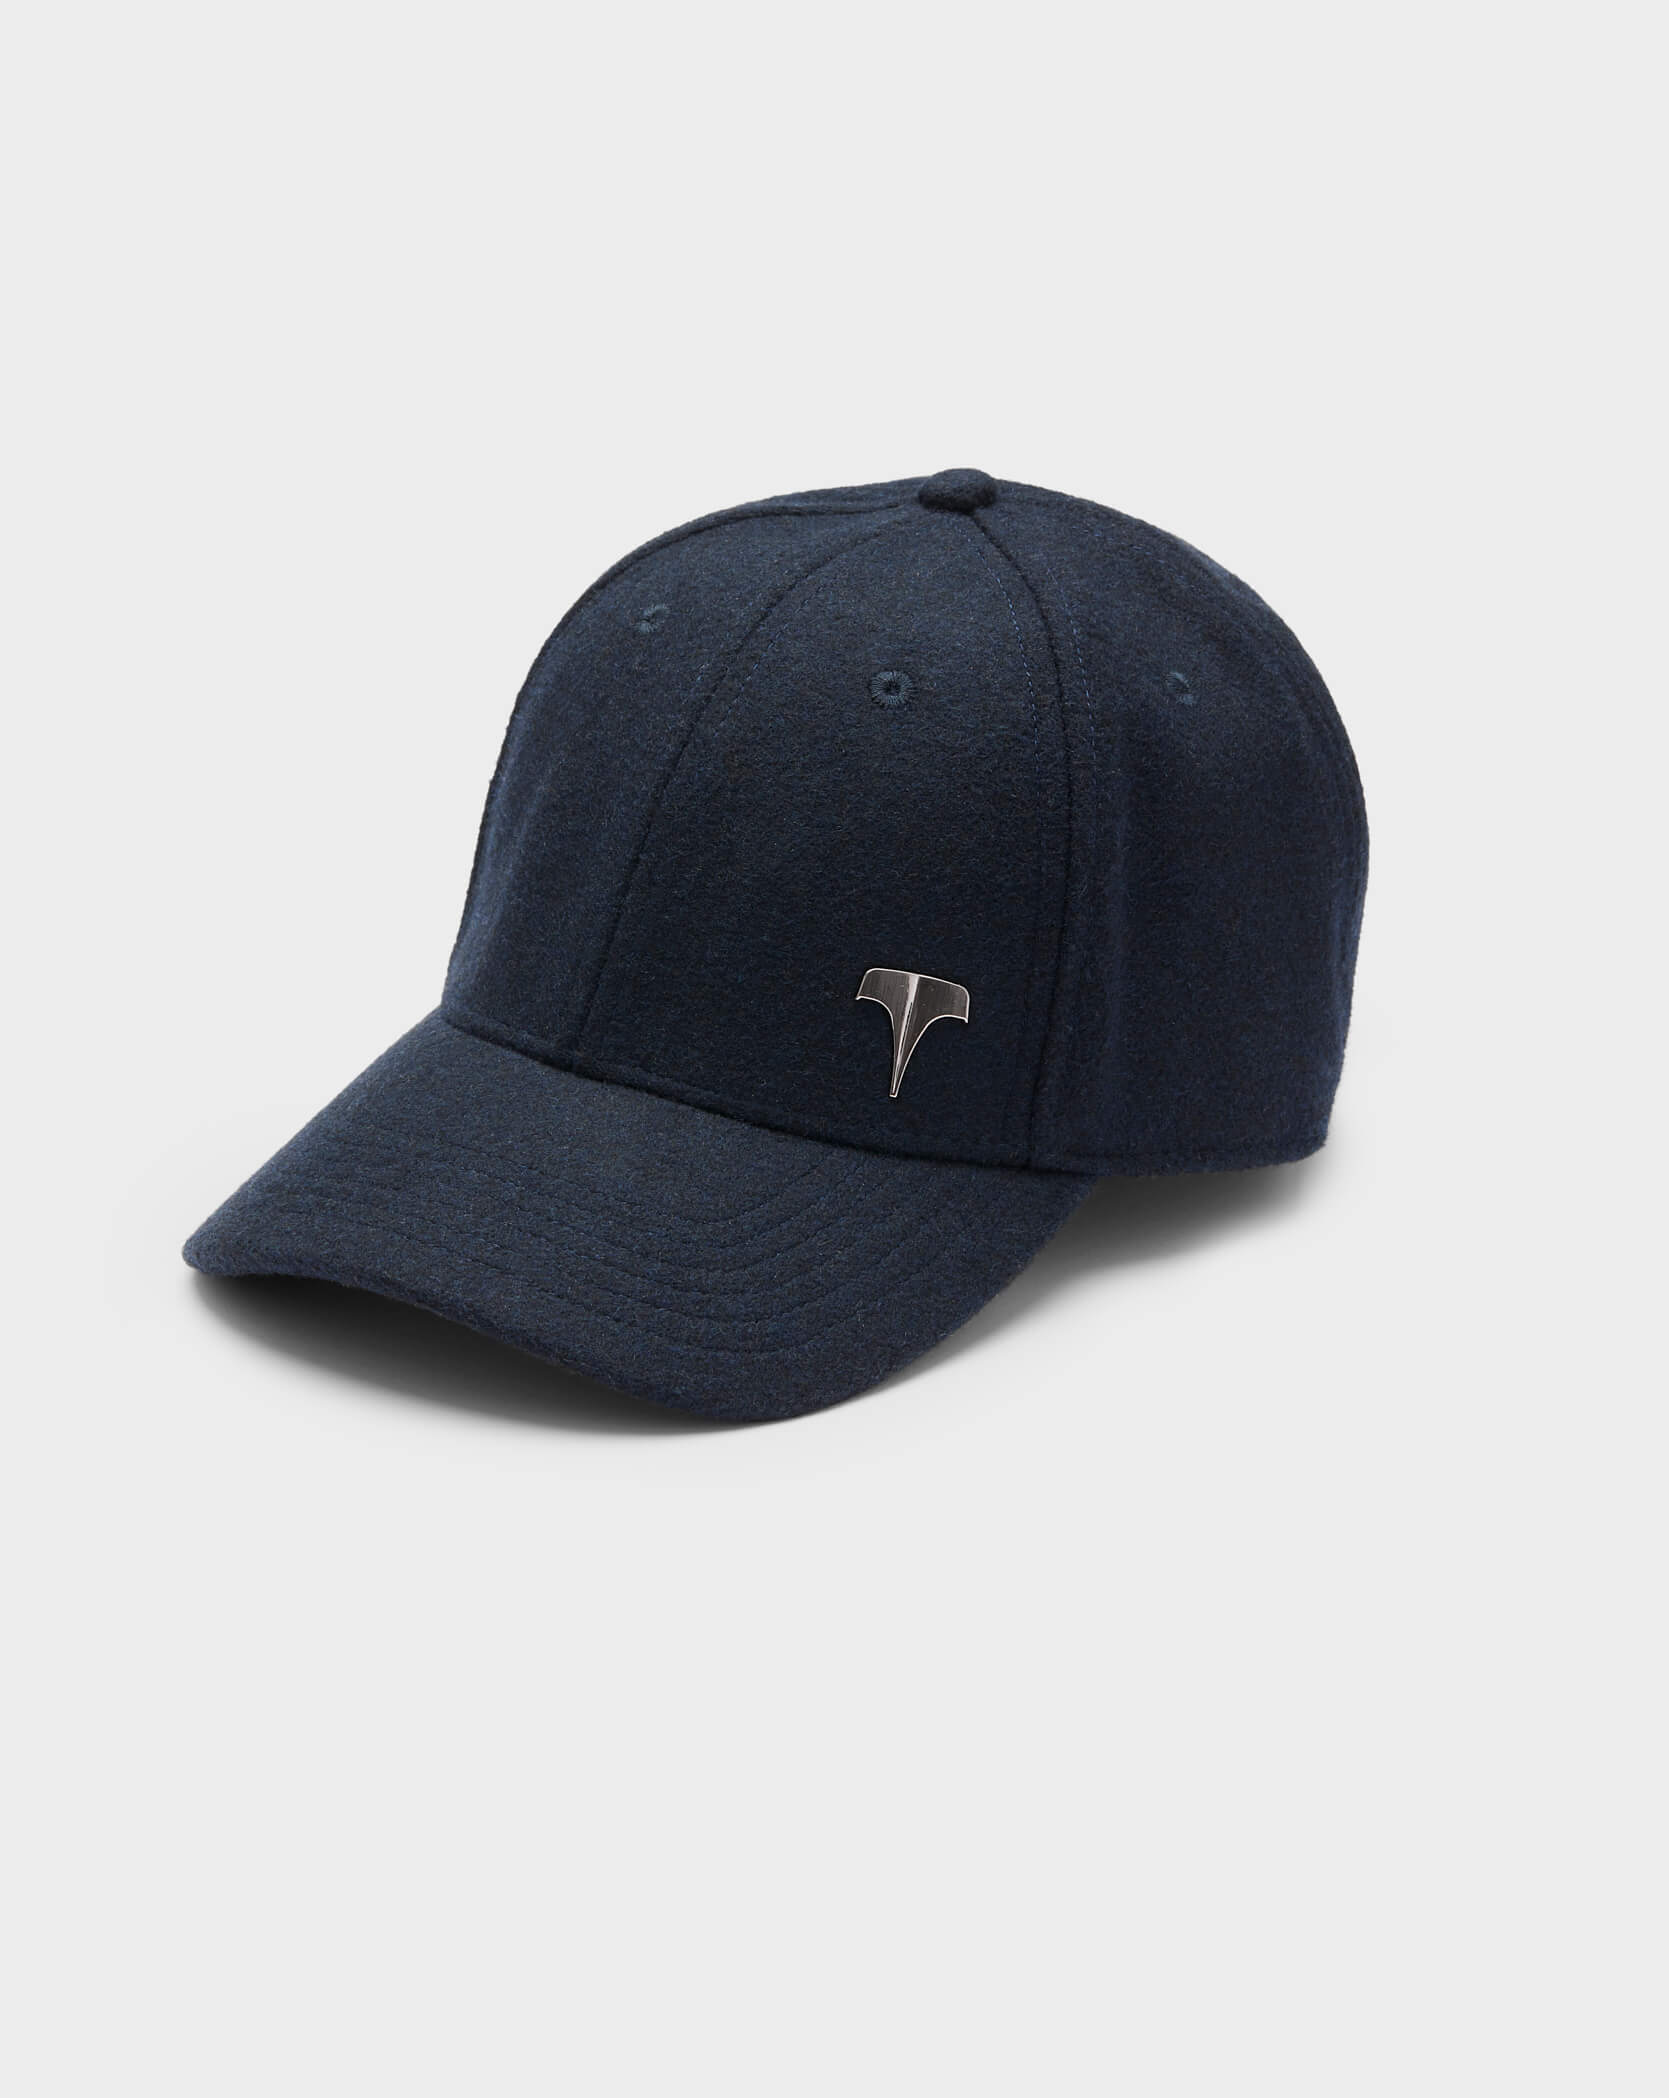 Twinzz navy pitcher cap with small silver logo